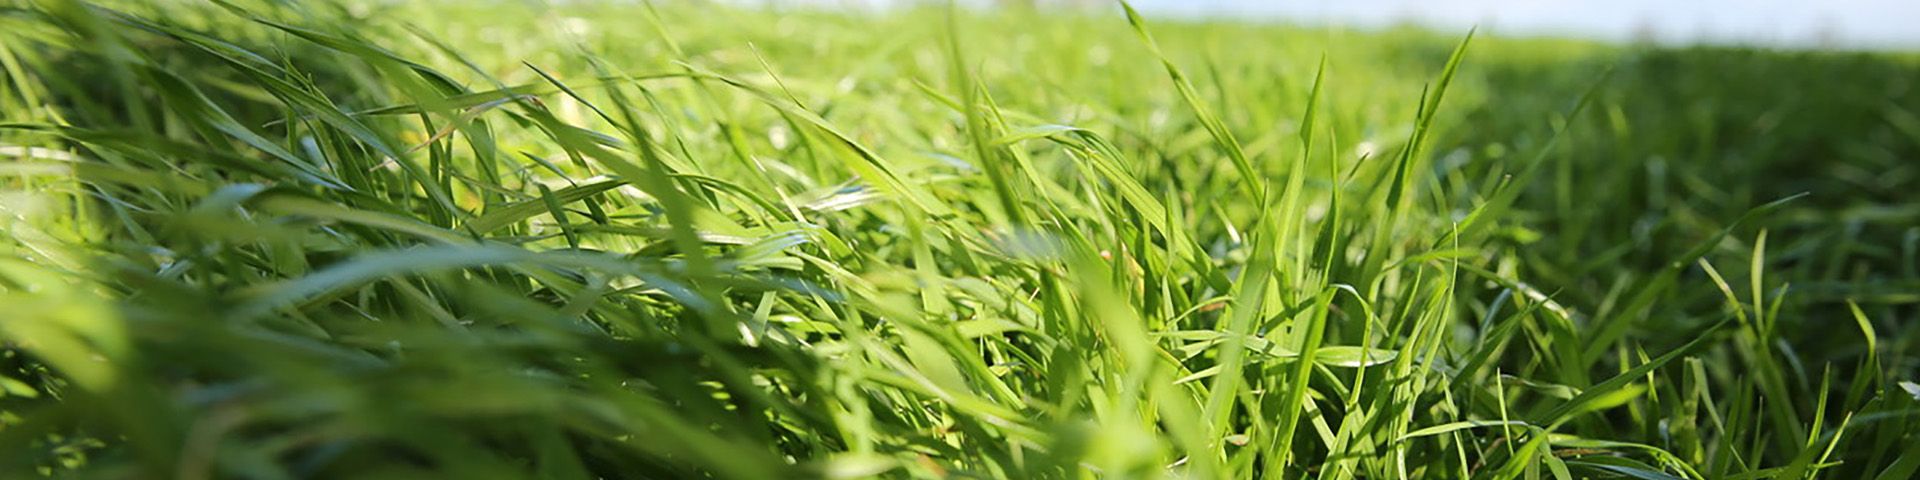 Close up of pasture grass in a paddock on a sunny day